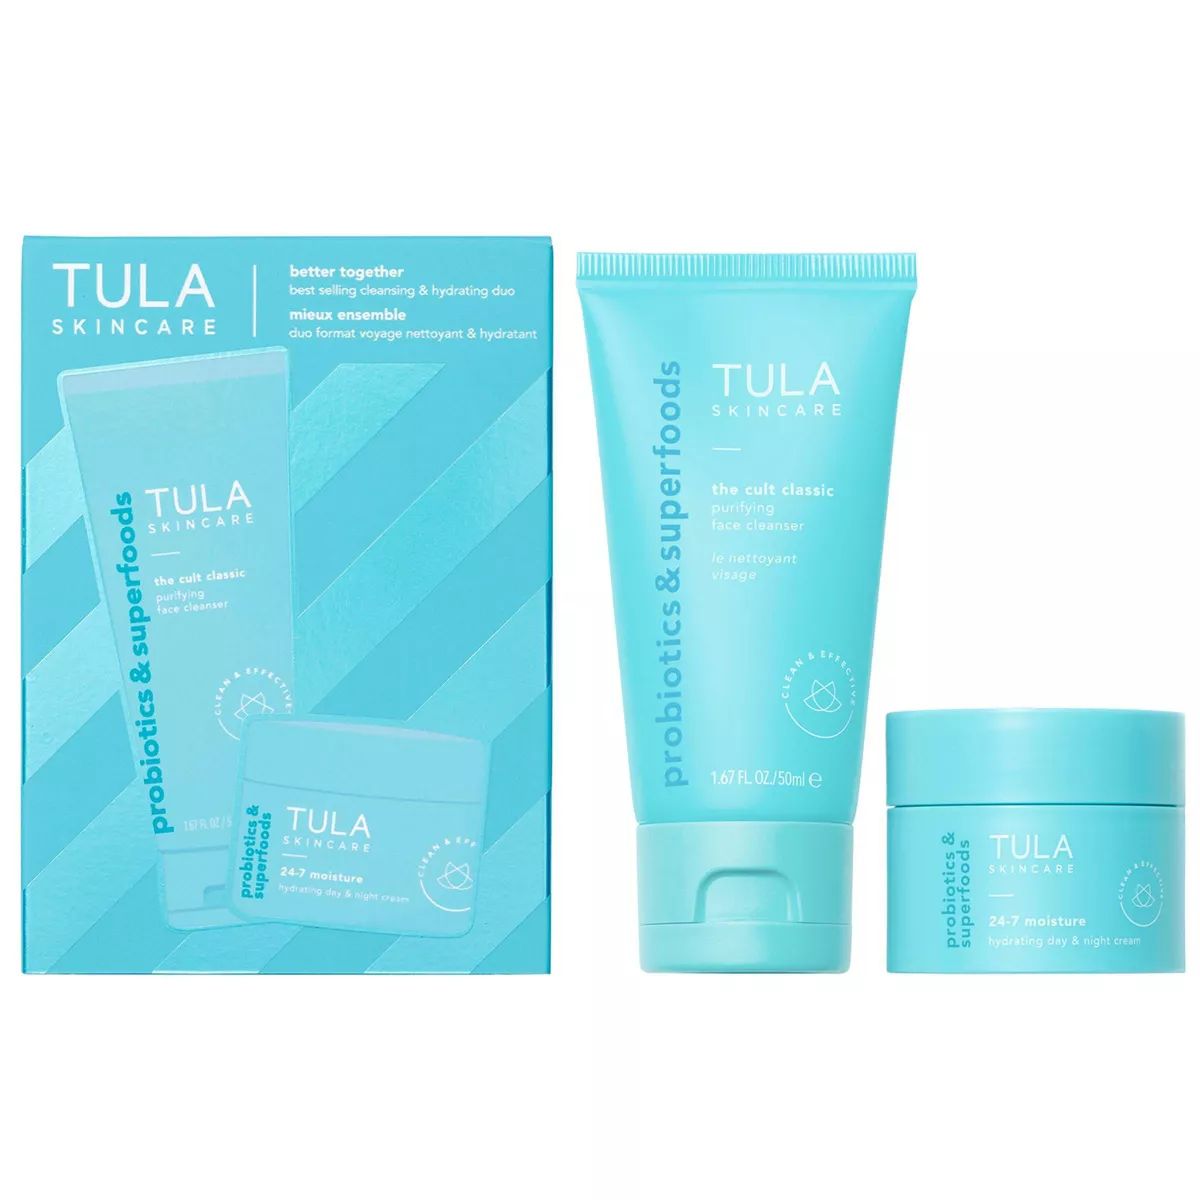 TULA SKINCARE Better Together Cleansing & Hydrating Skincare Set - 2.16oz/2pc - Ulta Beauty | Target